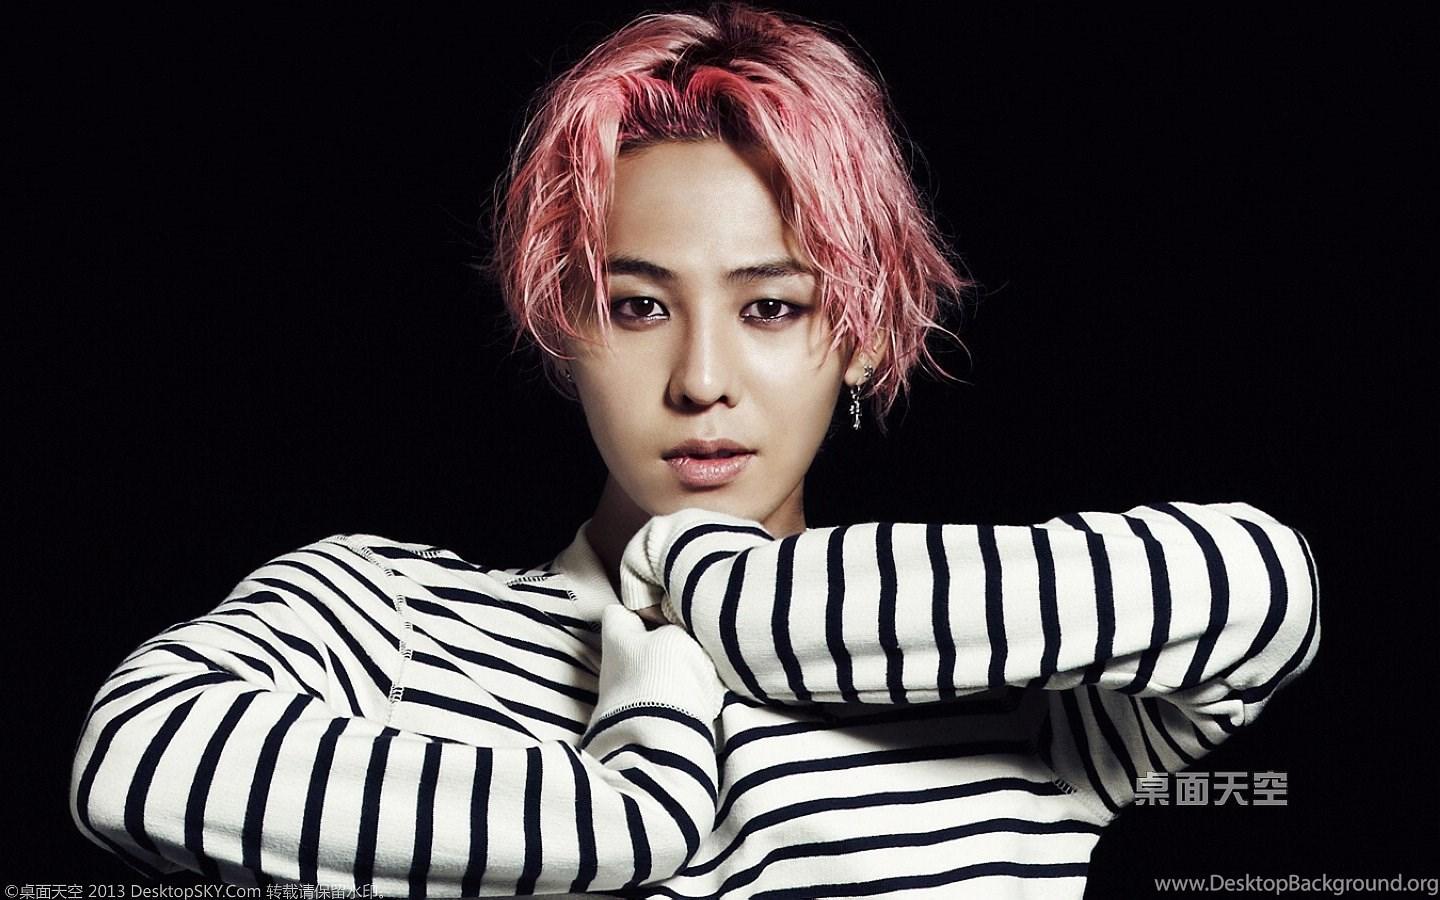 G Dragon Reportedly Forced Out Of Hospital + YG Responds